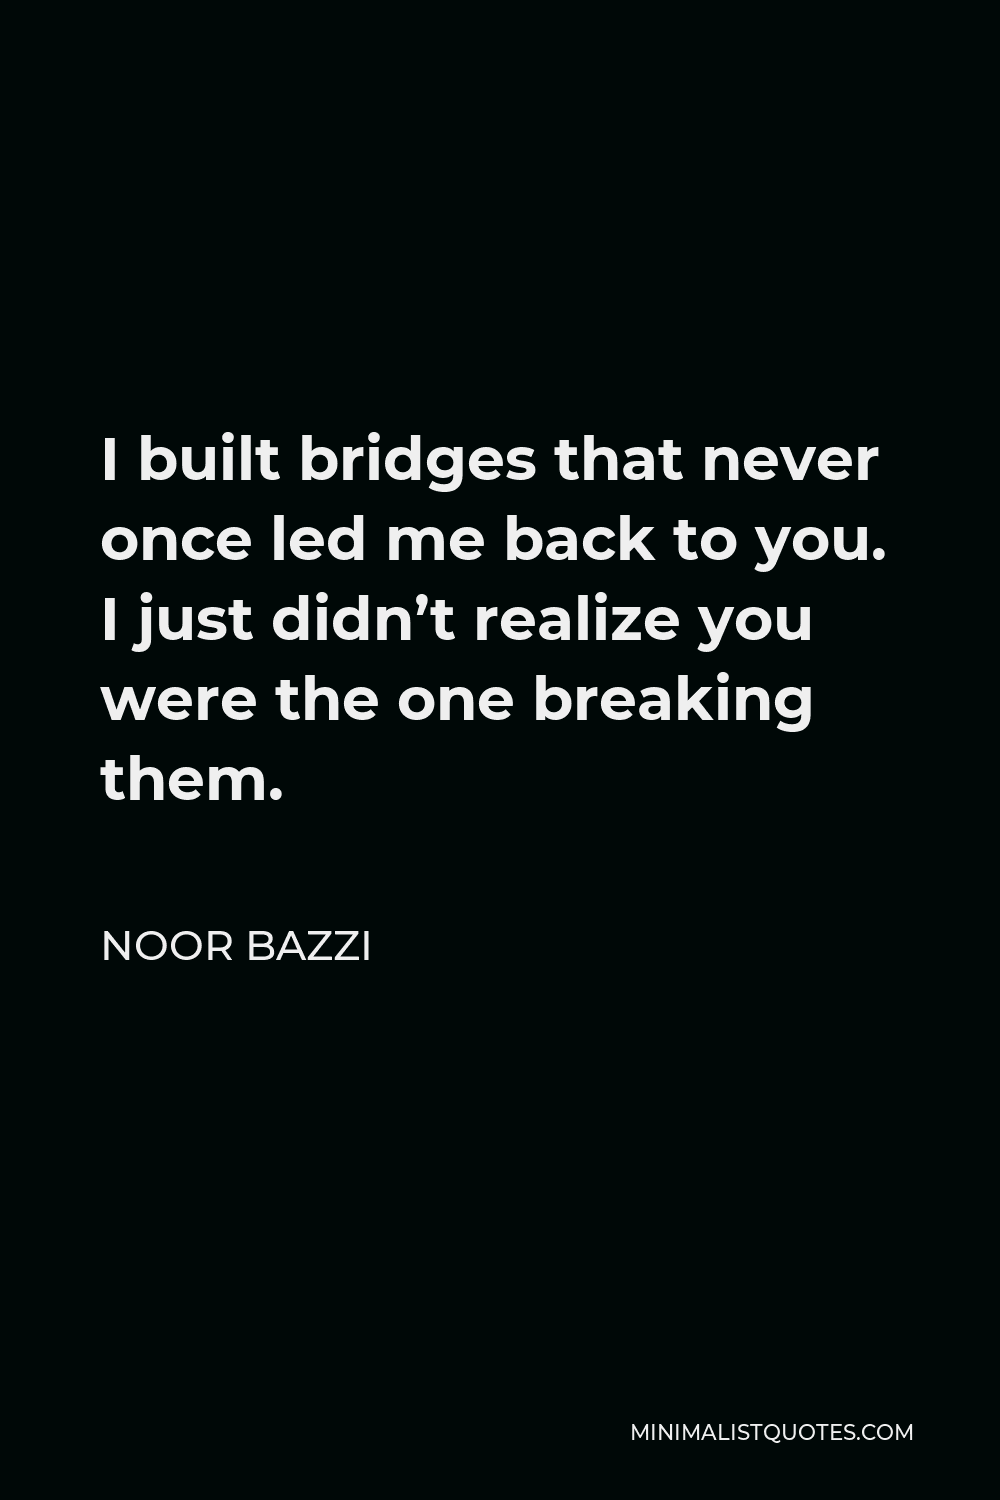 Noor Bazzi Quote - I built bridges that never once led me back to you. I just didn’t realize you were the one breaking them.